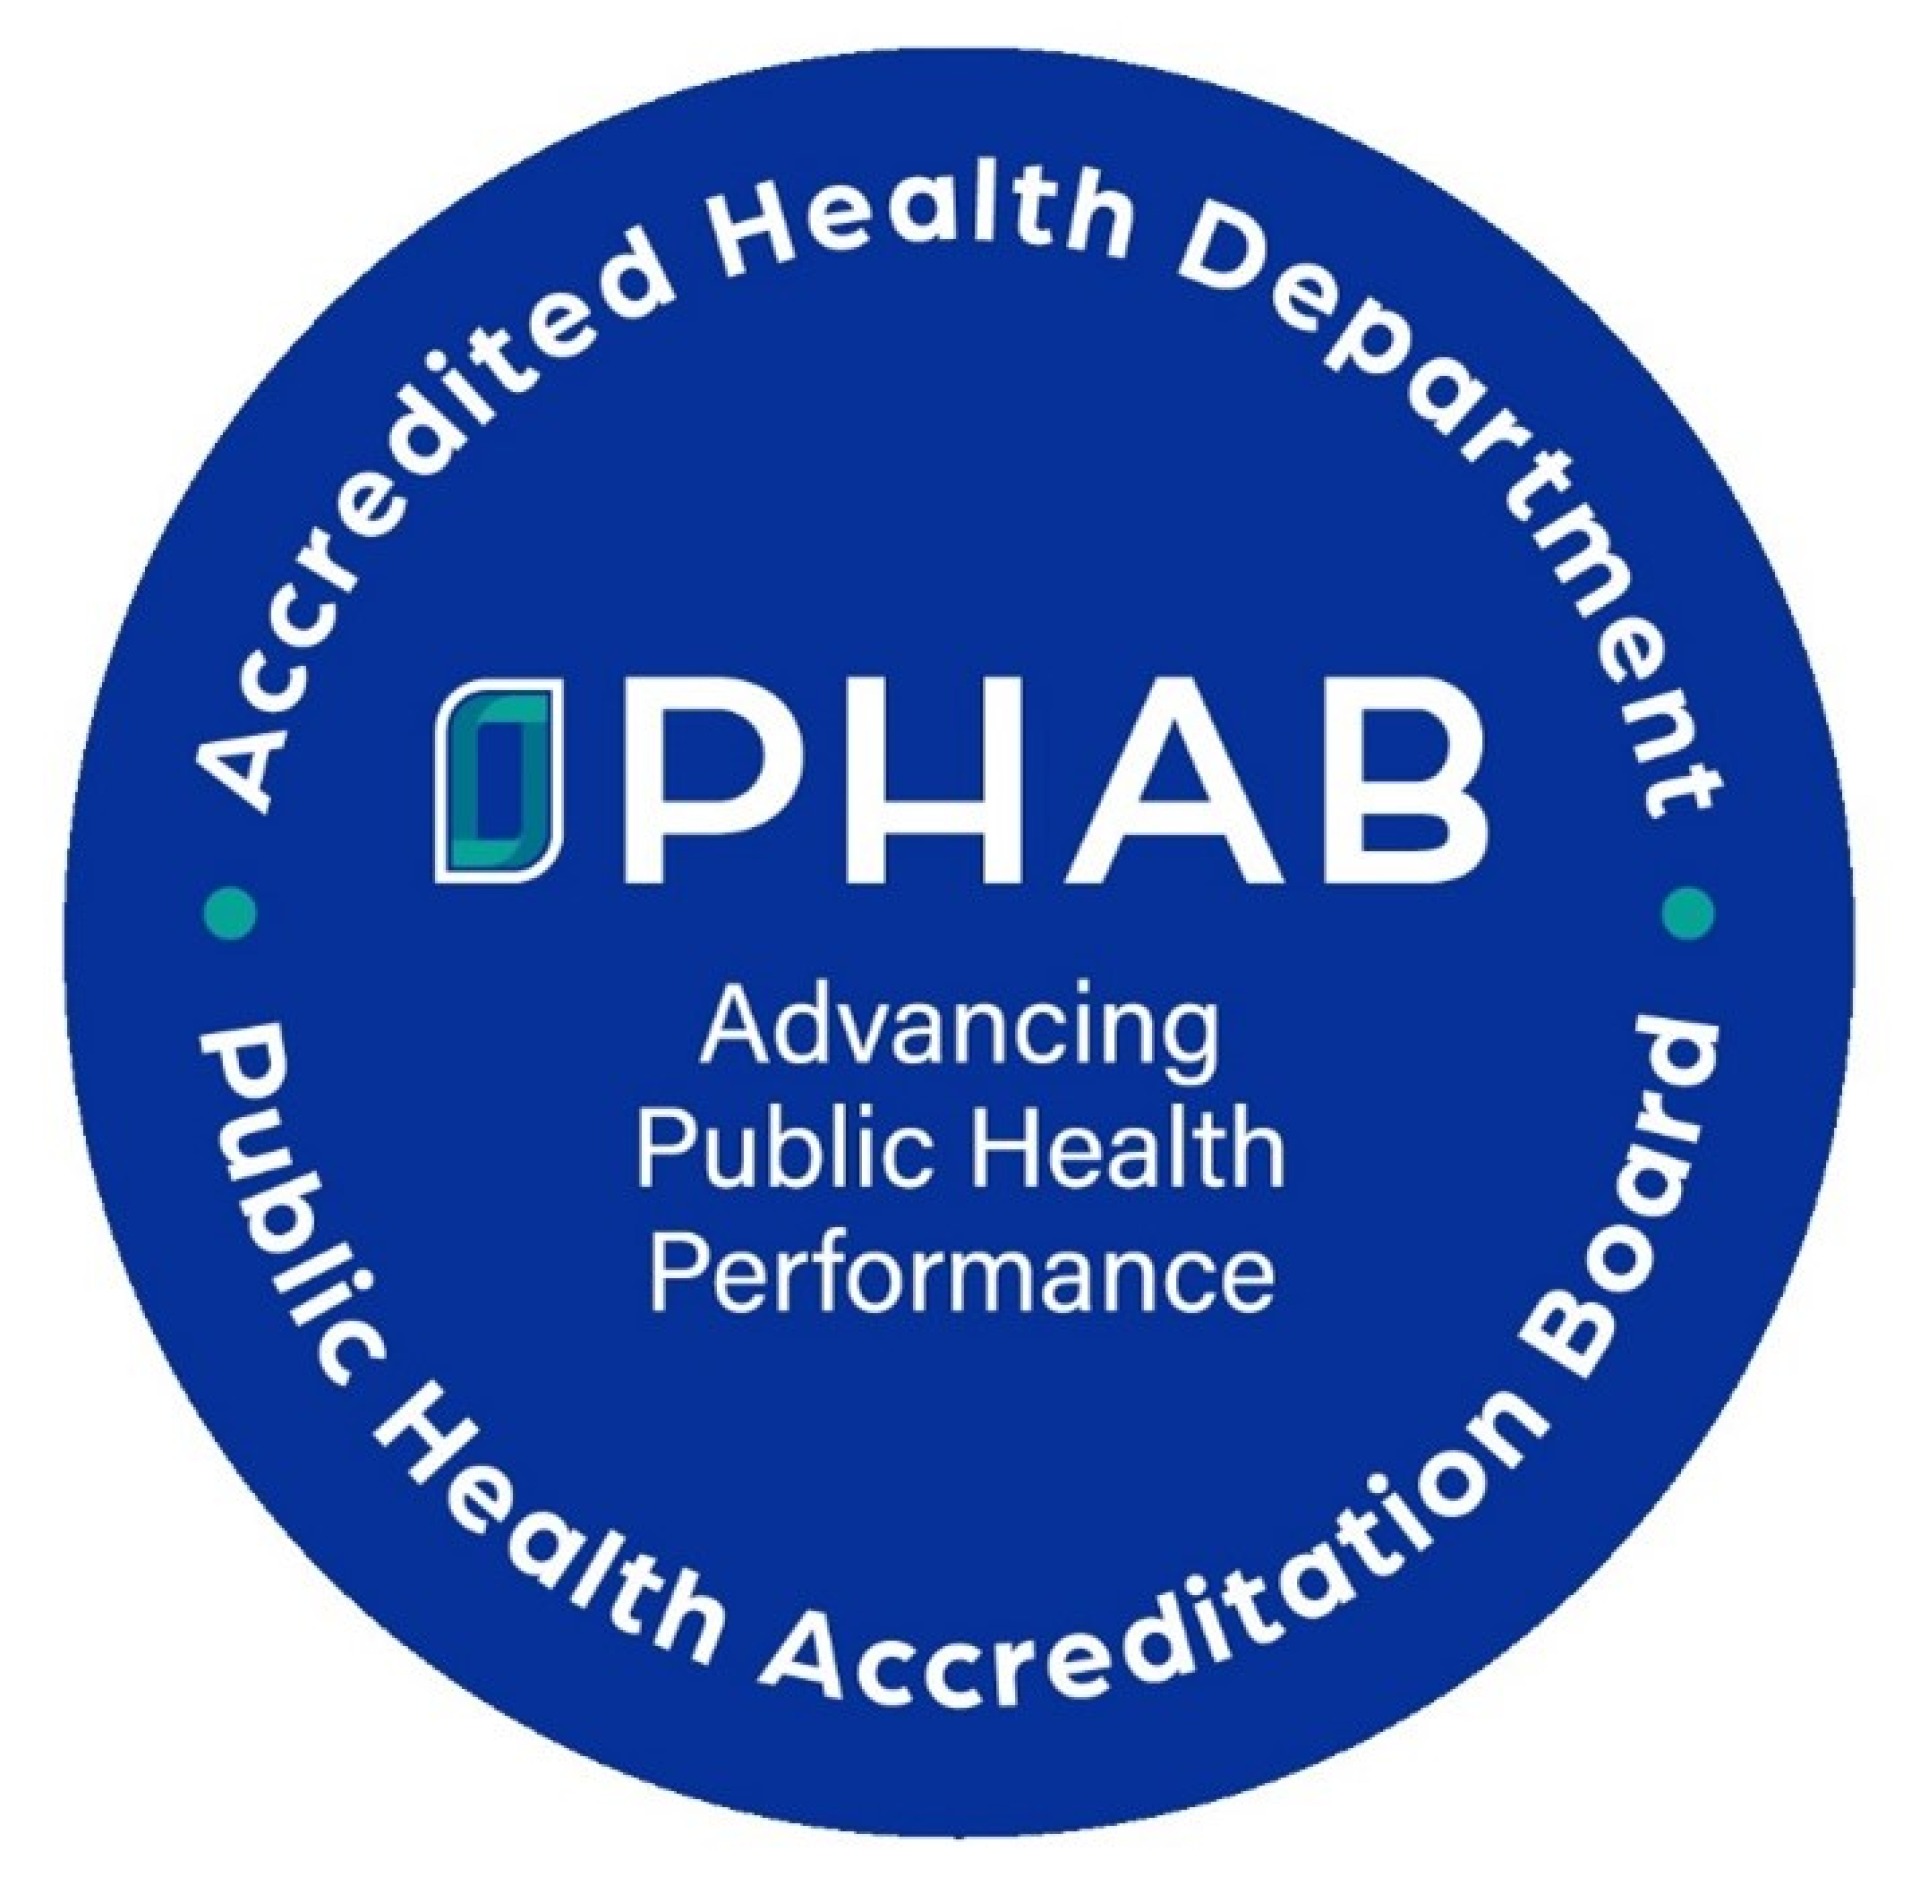 Accredited Health Department - PHAB Advancing Public Health Performance - Public Health Accreditation Board